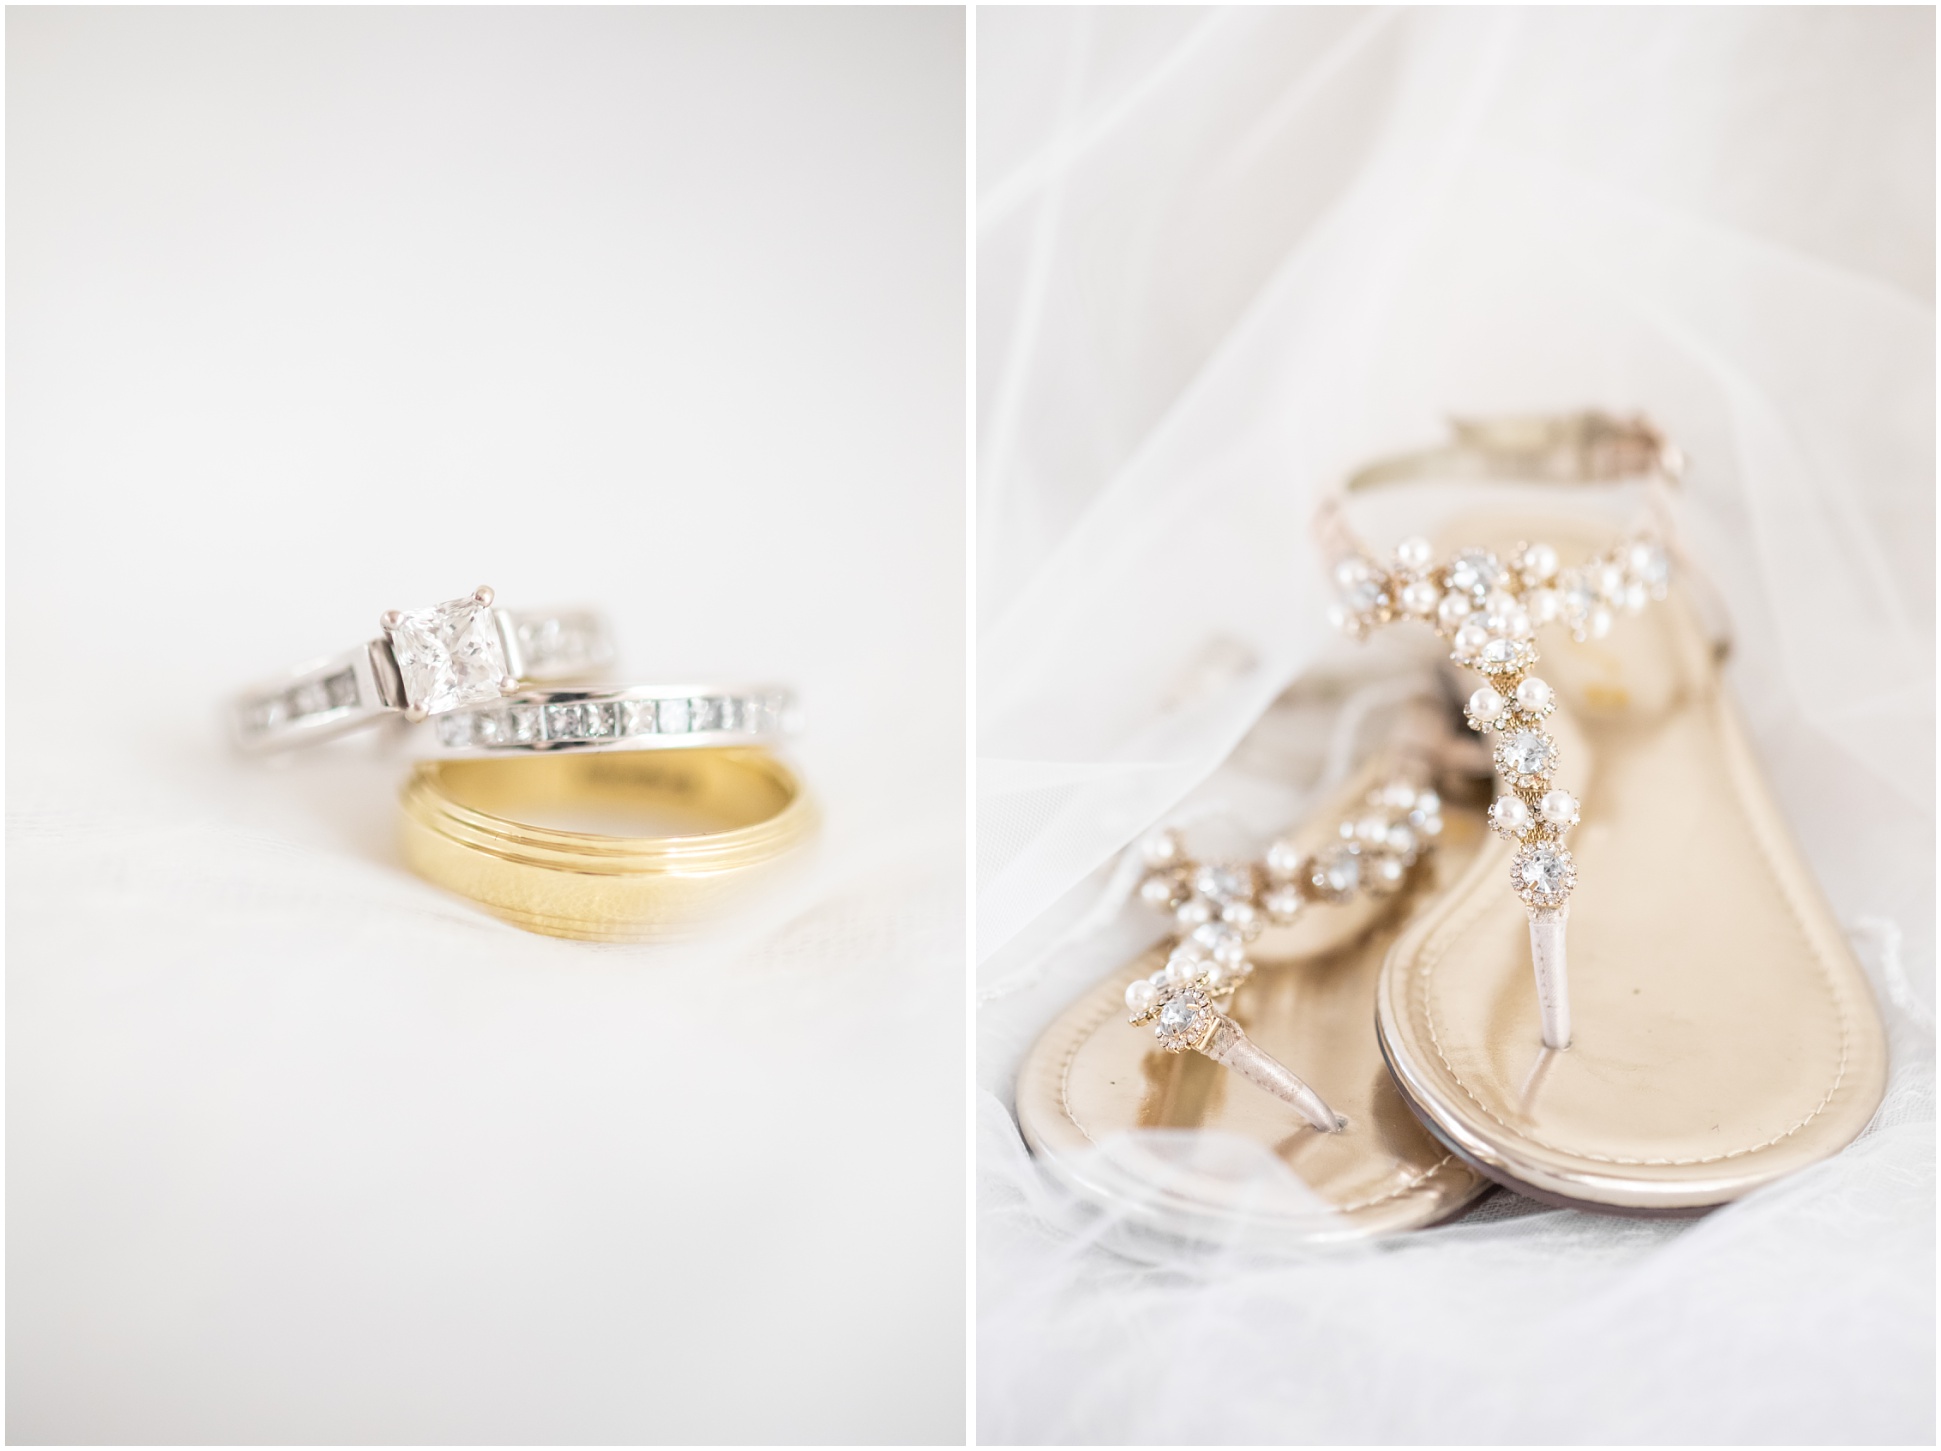 Left Image: Wedding Rings, Right Image: Gold Wedding Sandals with Pearls